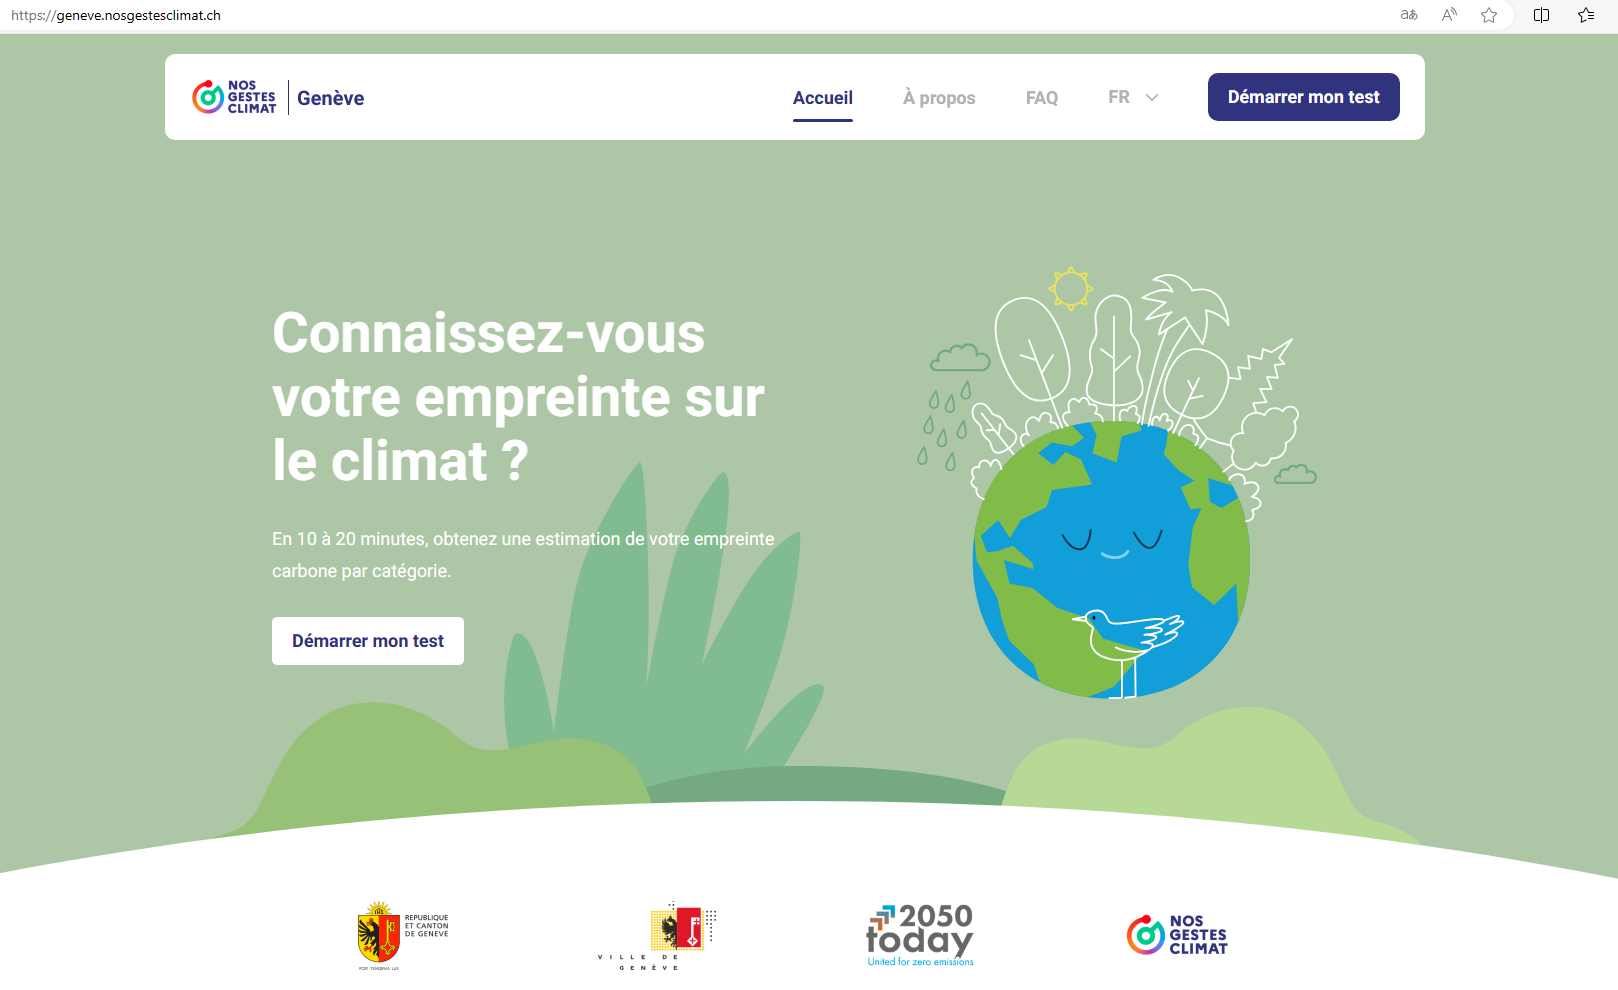 Launch of a carbon footprint calculator for Geneva